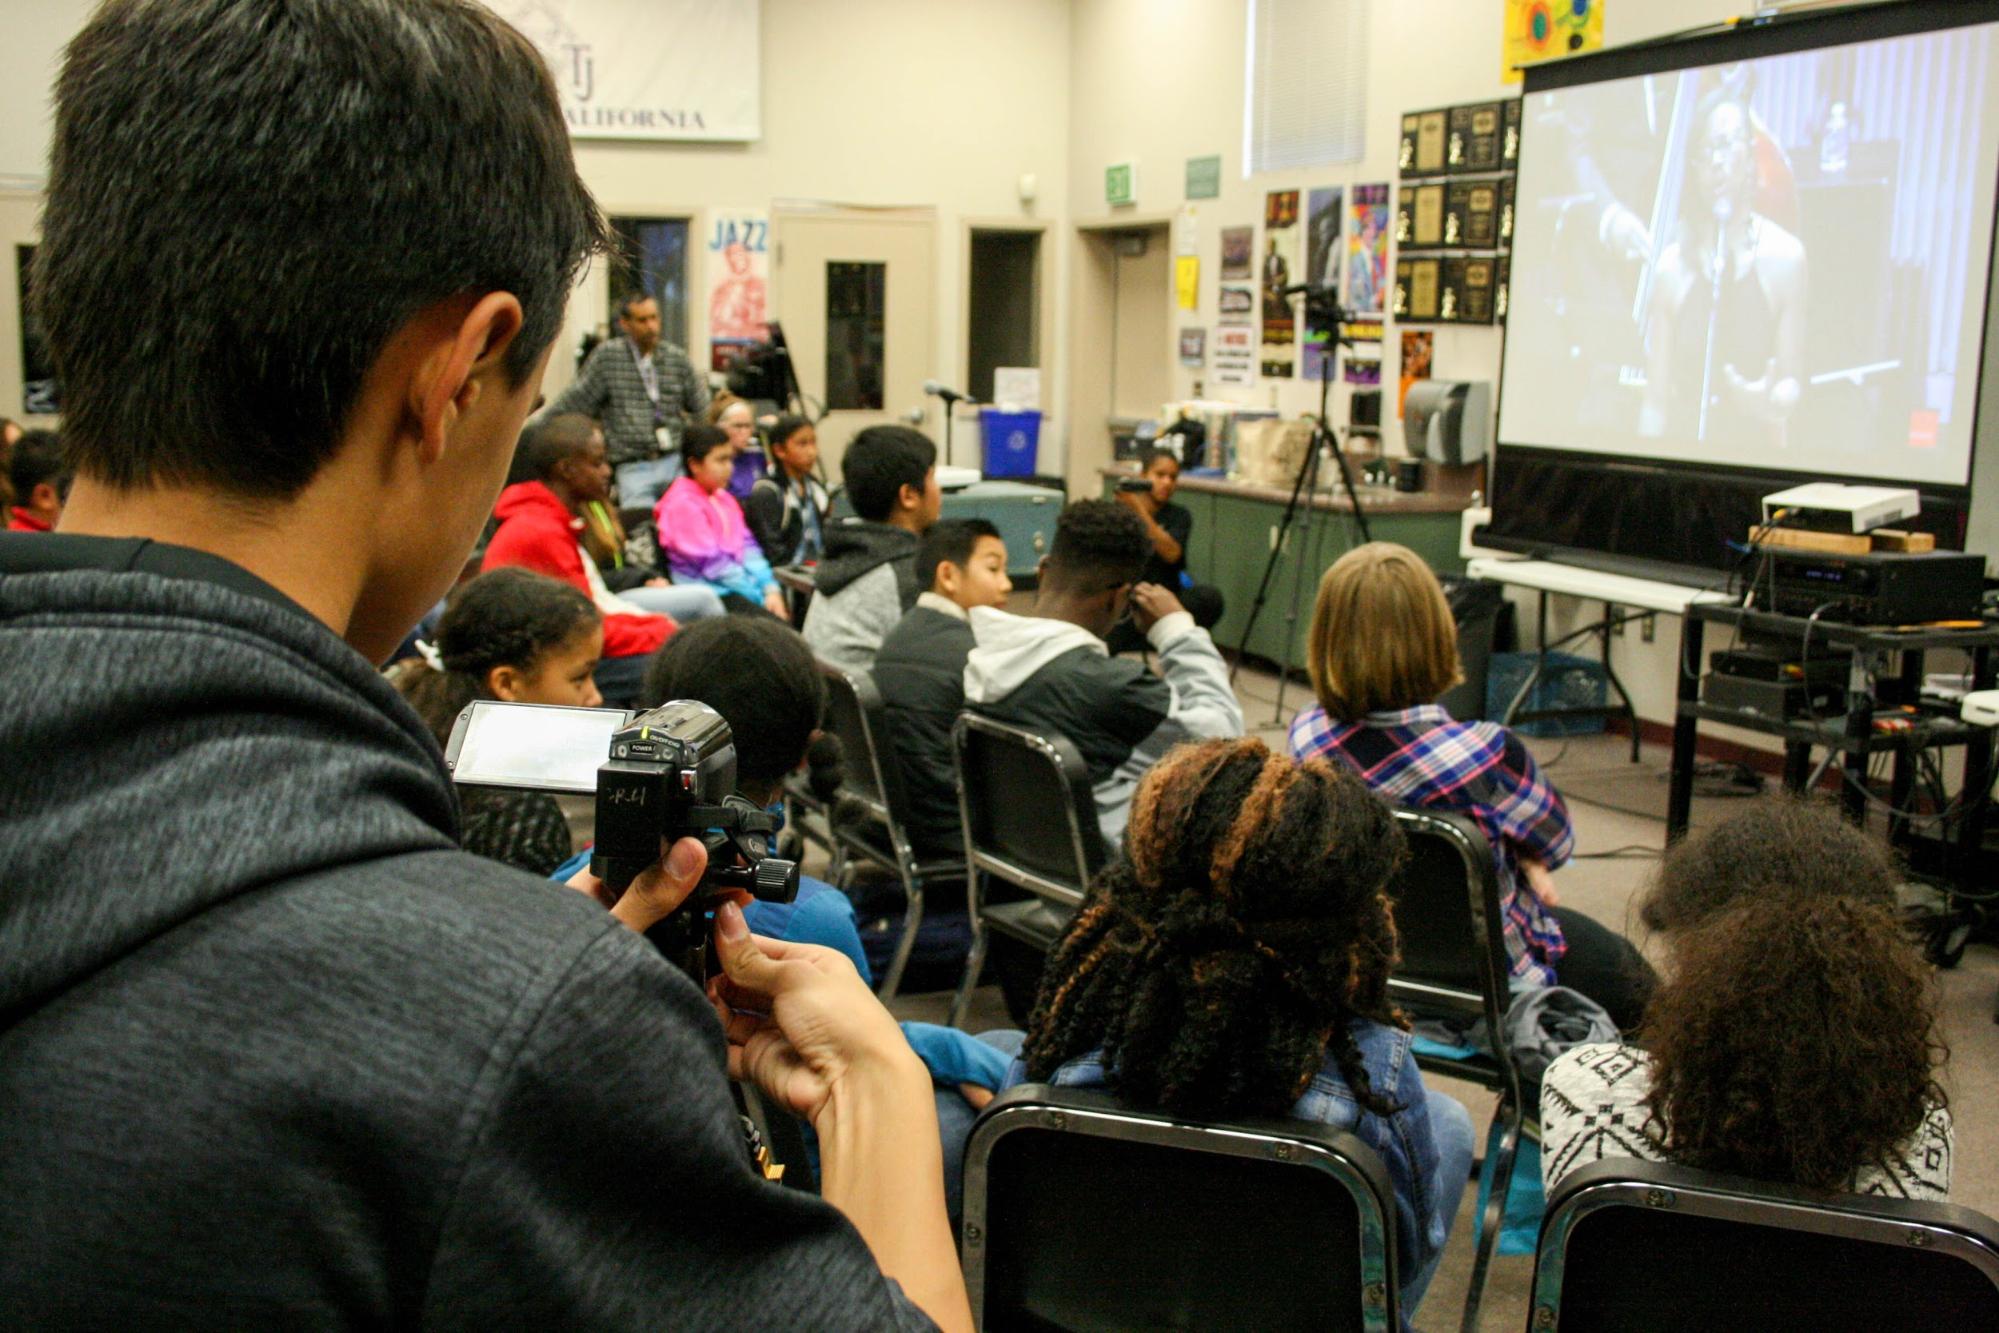 Toby Johnson Middle School video production team captures the event from multiple angles.